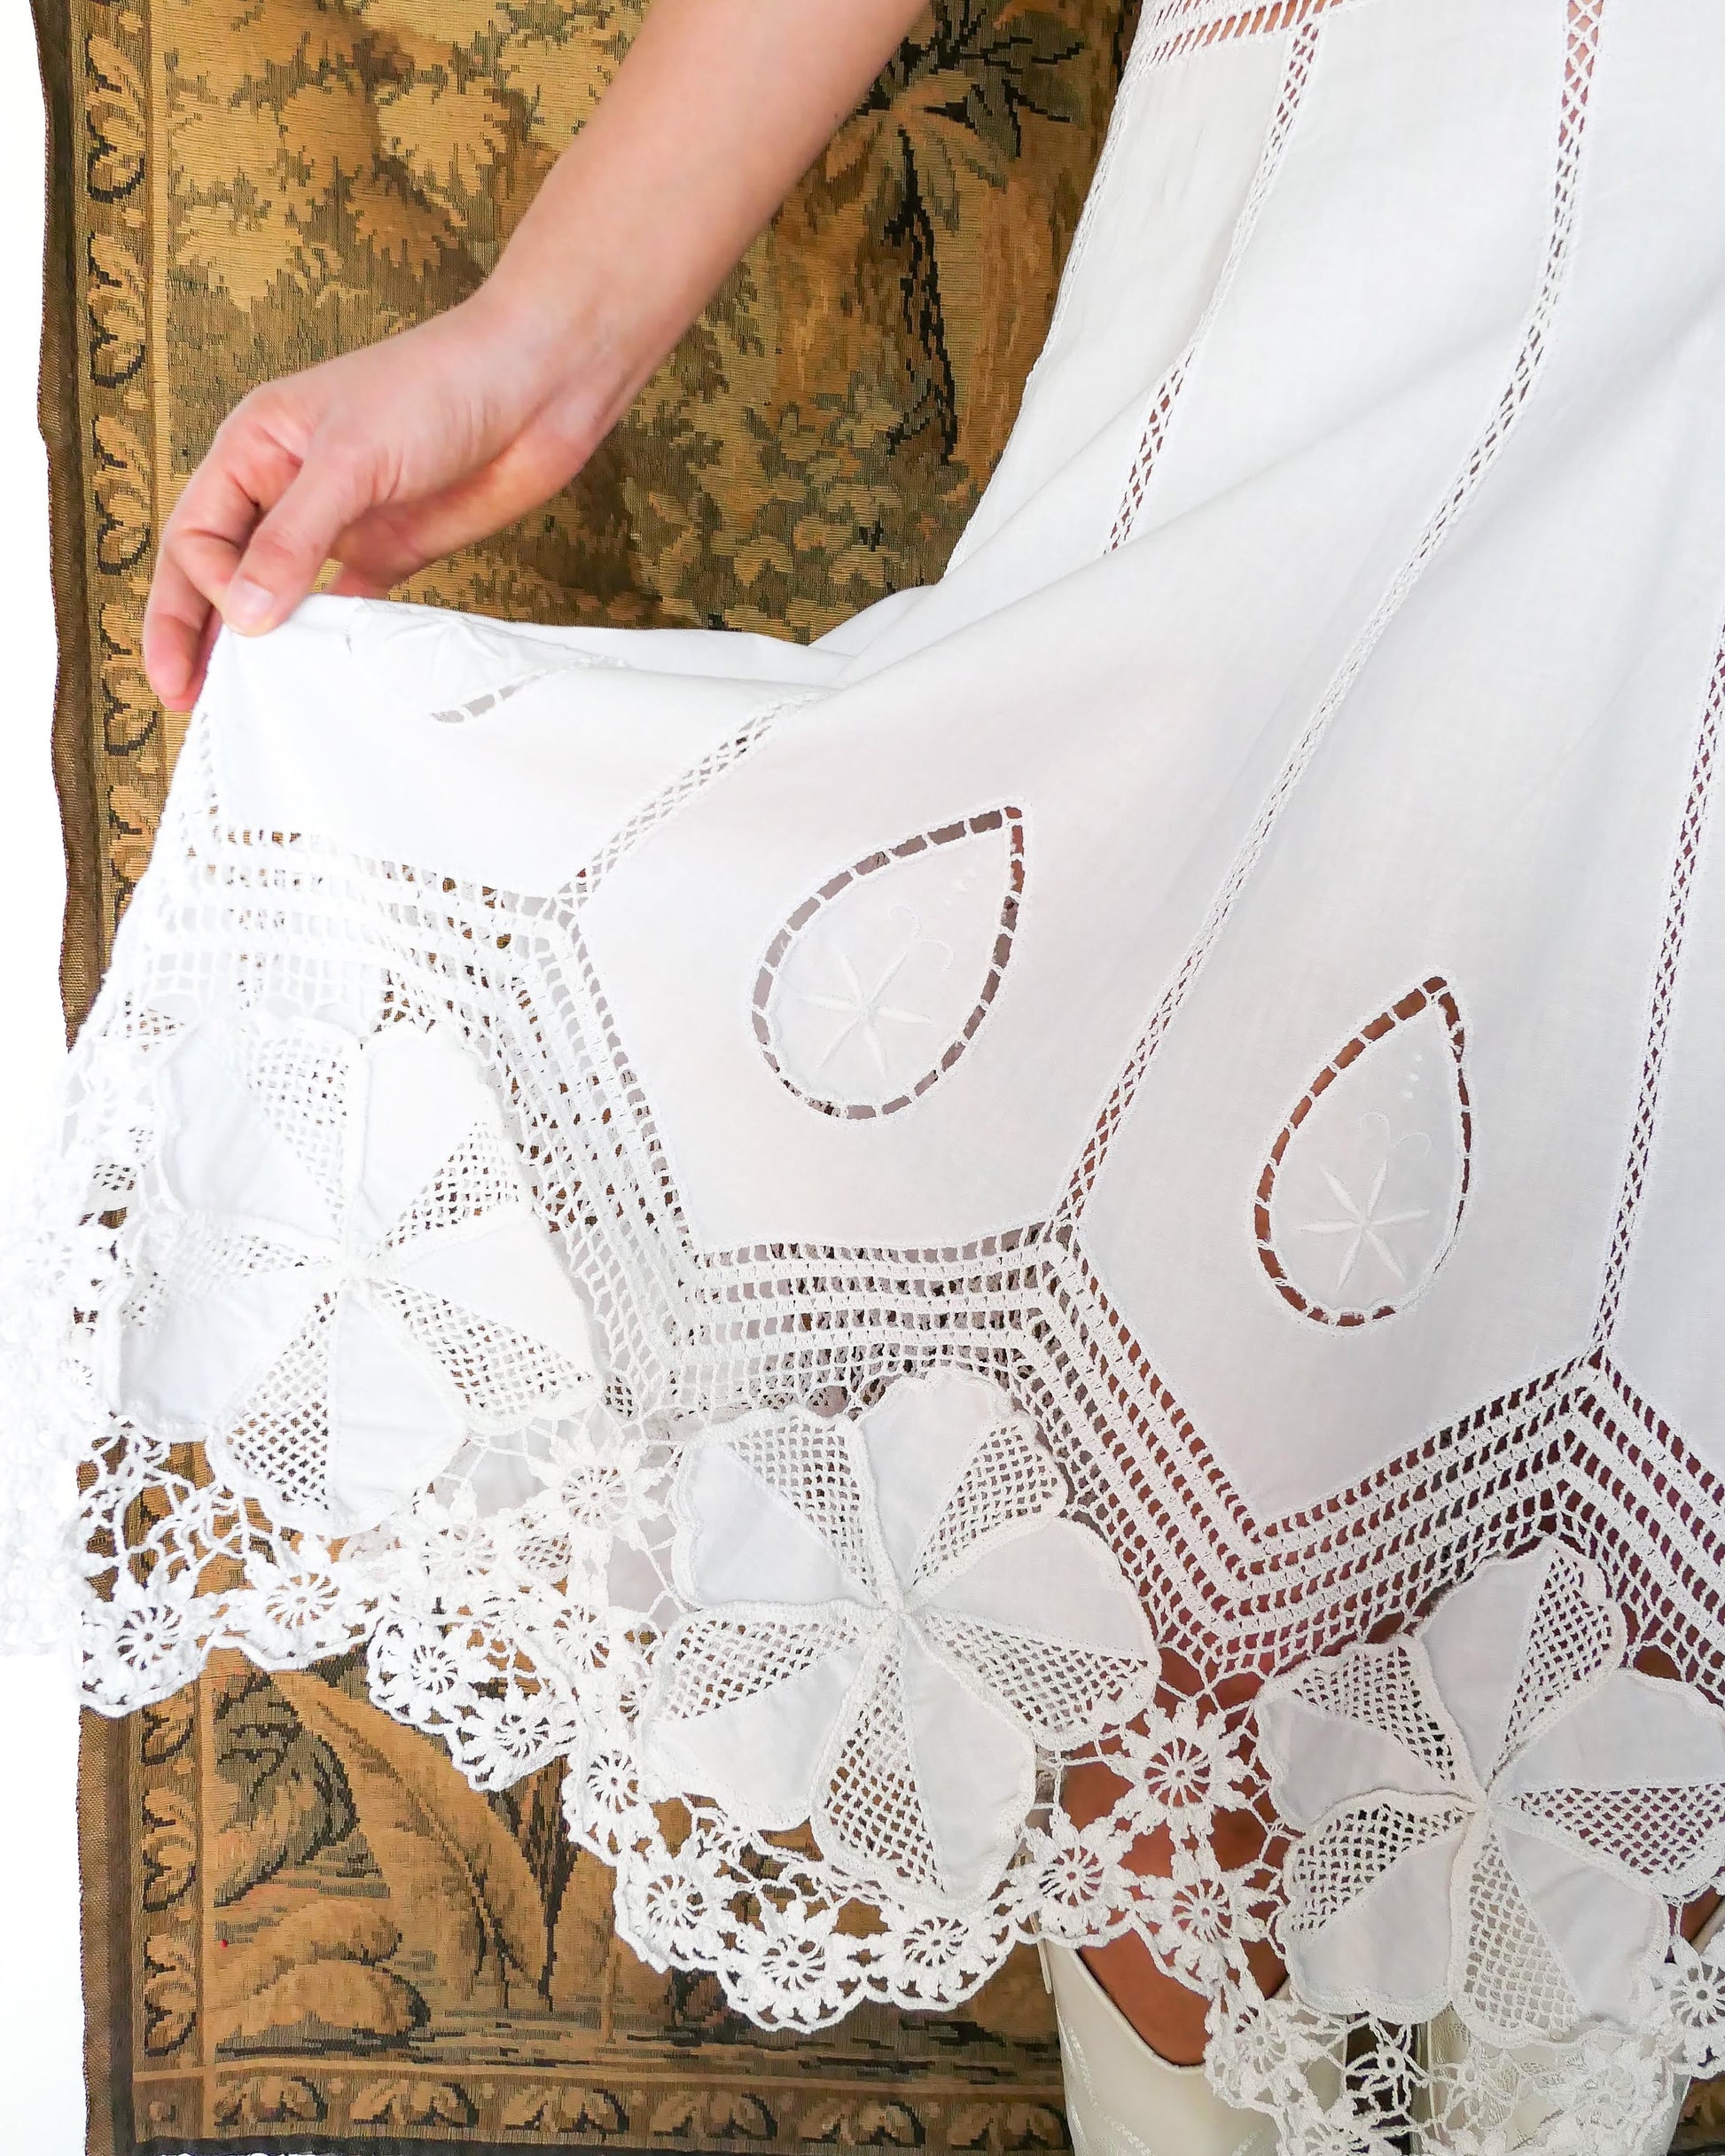 Closeup view of the hem of dress with detailed crochet and embroidery work.  A white cotton midi dress with whimsical crochet and embroidered flowers at the hem and collar, and teardrop shaped eyelet detail on the skirt. Stretchable ribbed knit fabric around the waist adds contour to the dress.